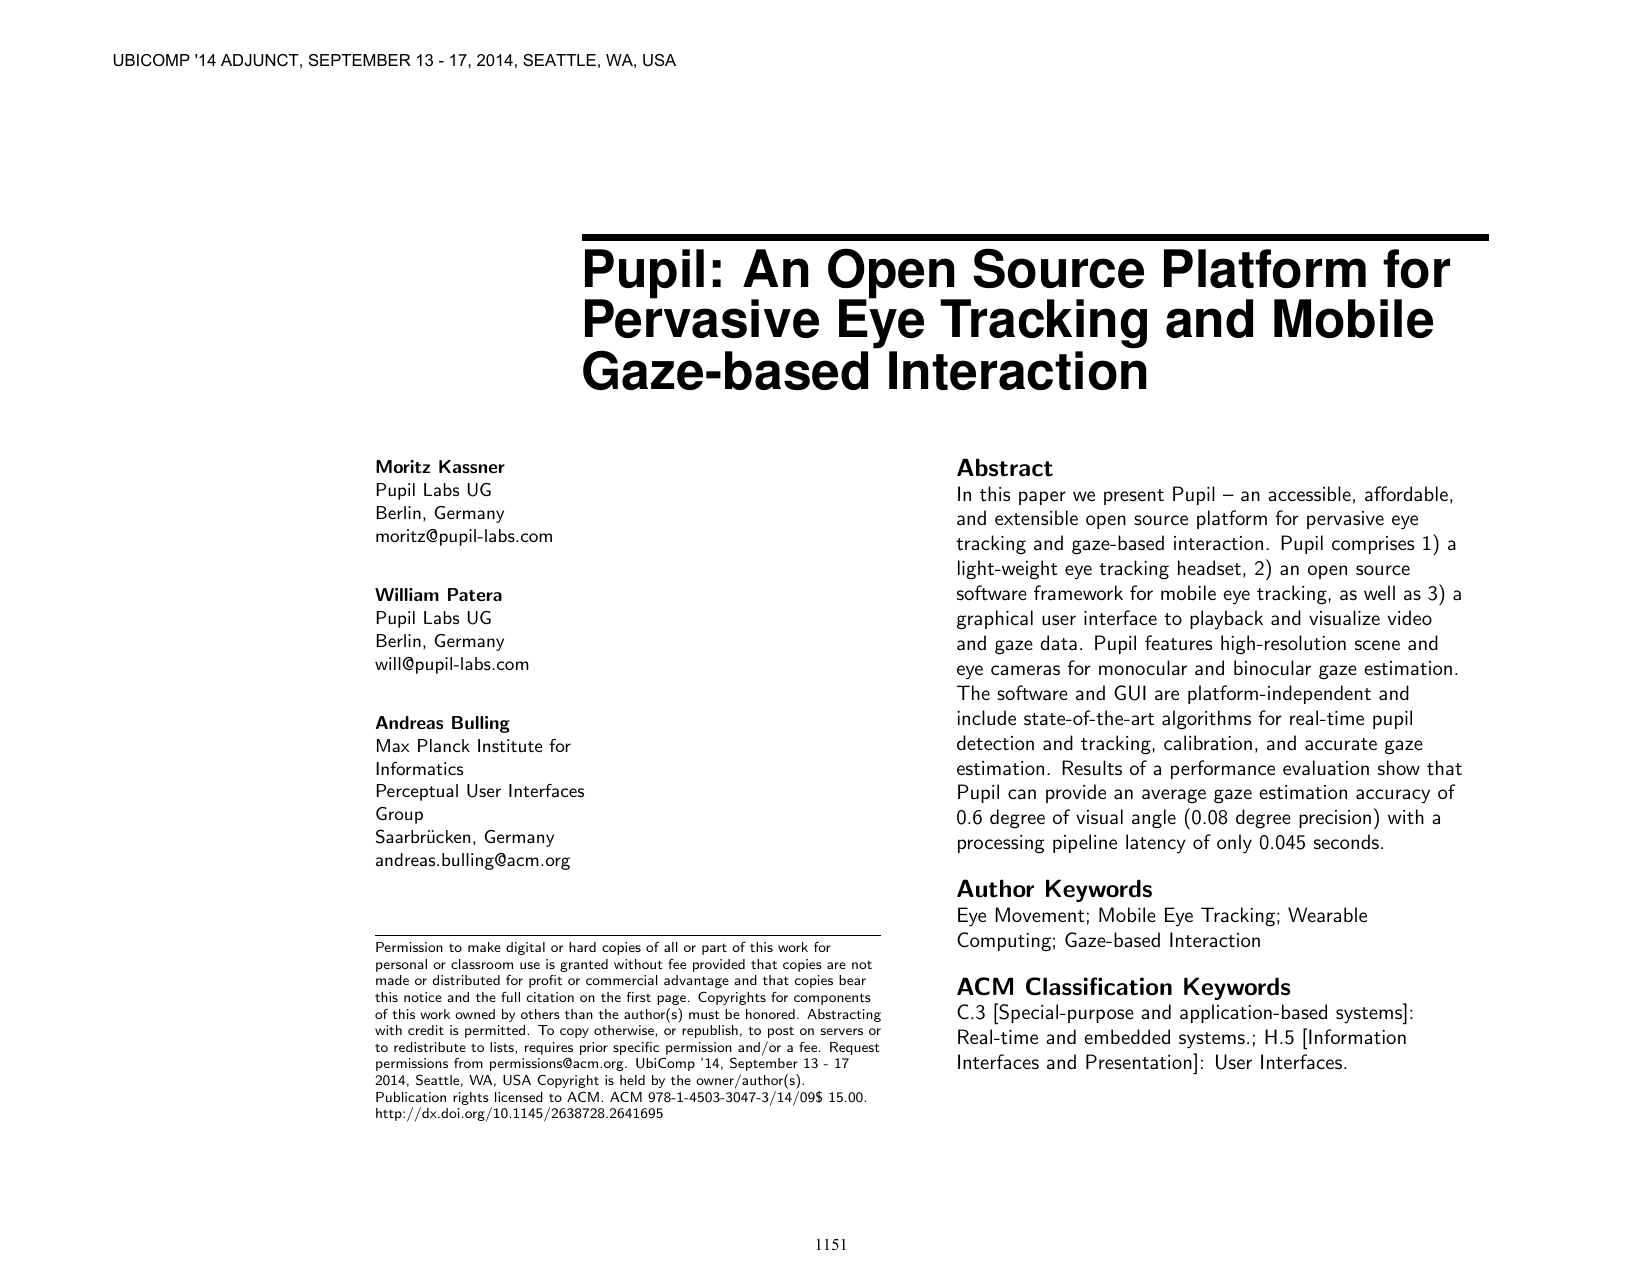 Pupil: an open source platform for pervasive eye tracking and mobile gaze-based interaction